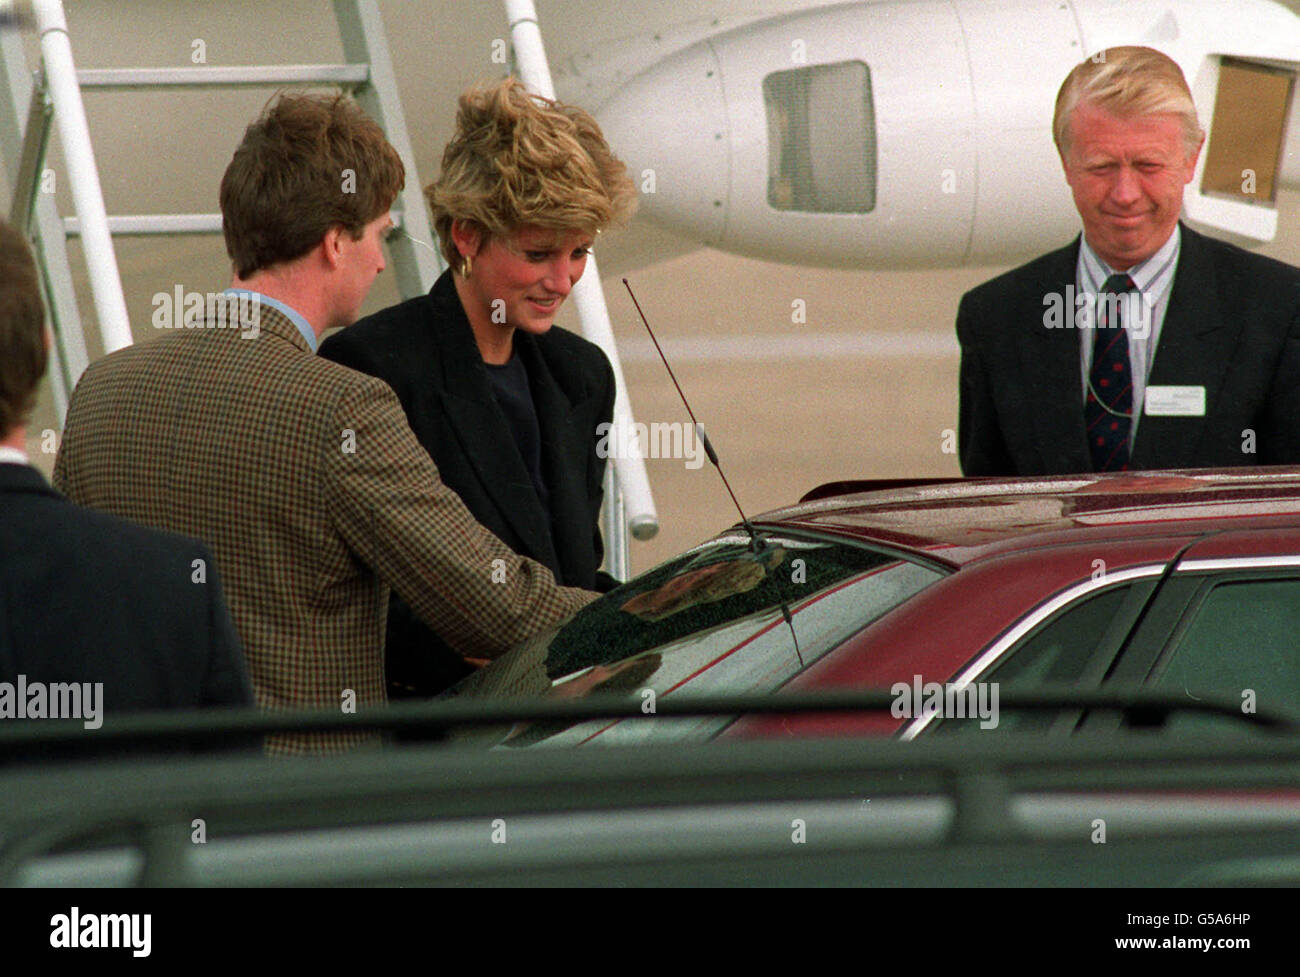 1992: A smiling Princess of Wales arriving at Heathrow Airport from Aberdeen. (Picture released shortly after so-called 'Squidgygate' revelations in The Sun 24/08/92). Stock Photo